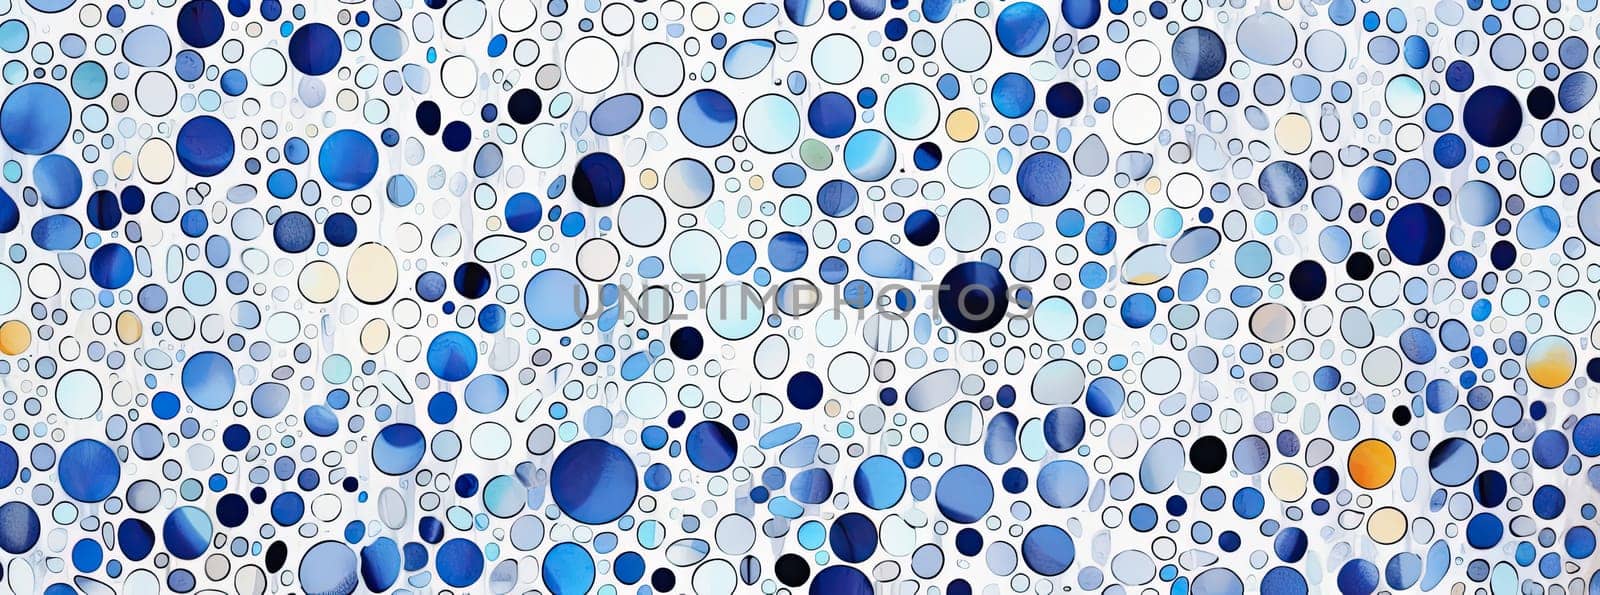 Watercolor background of blue circles by cherezoff